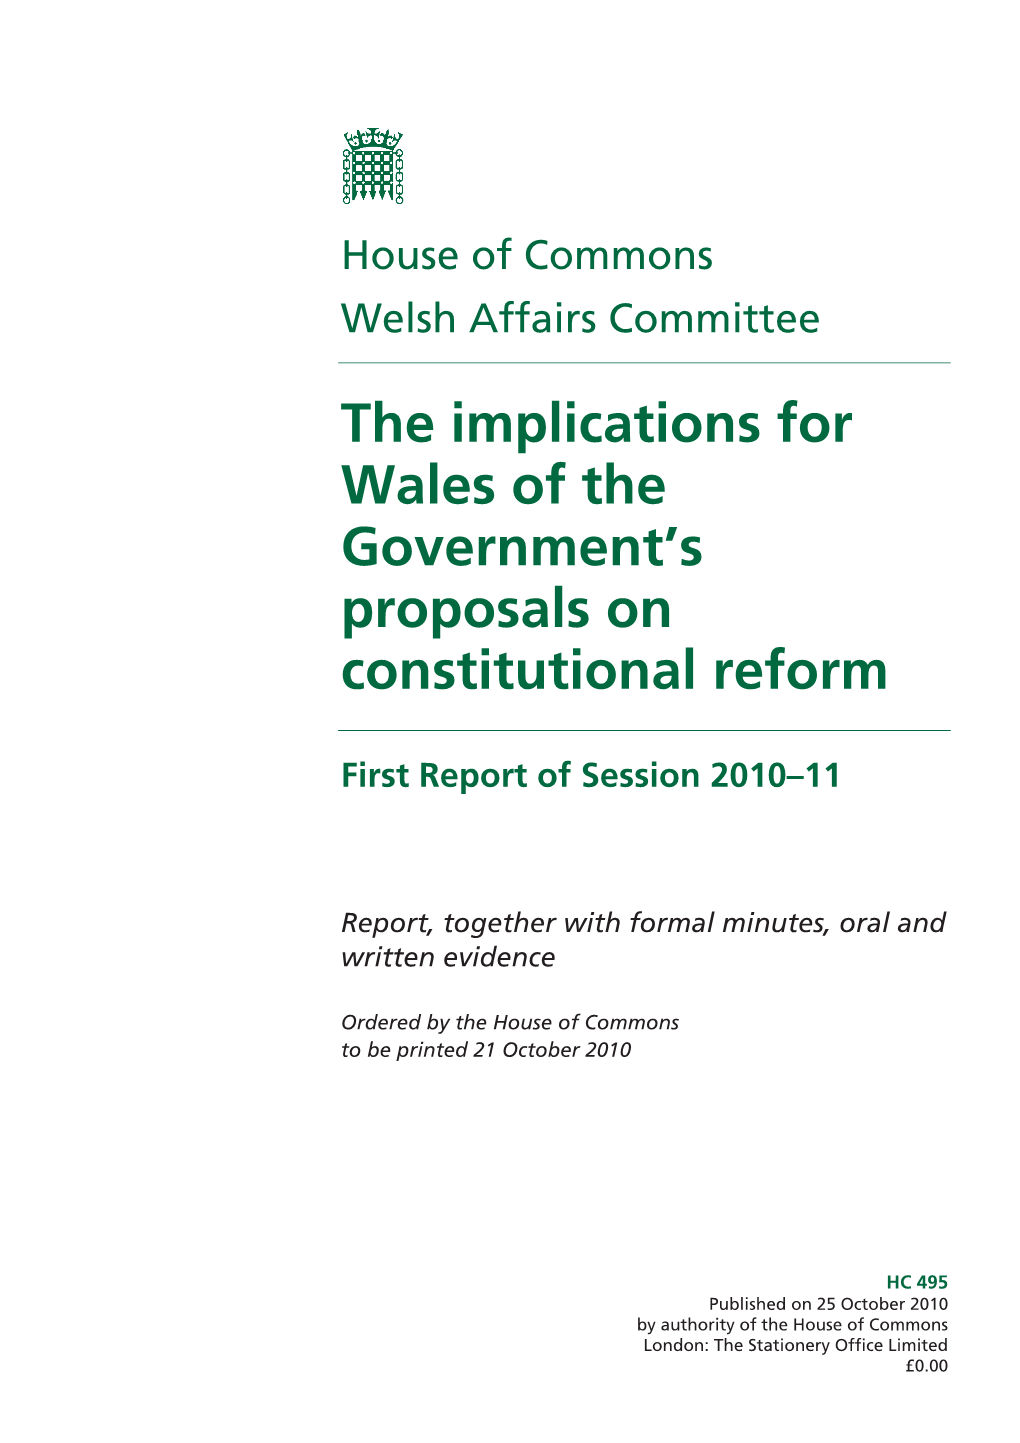 The Implications for Wales of the Government's Proposals On